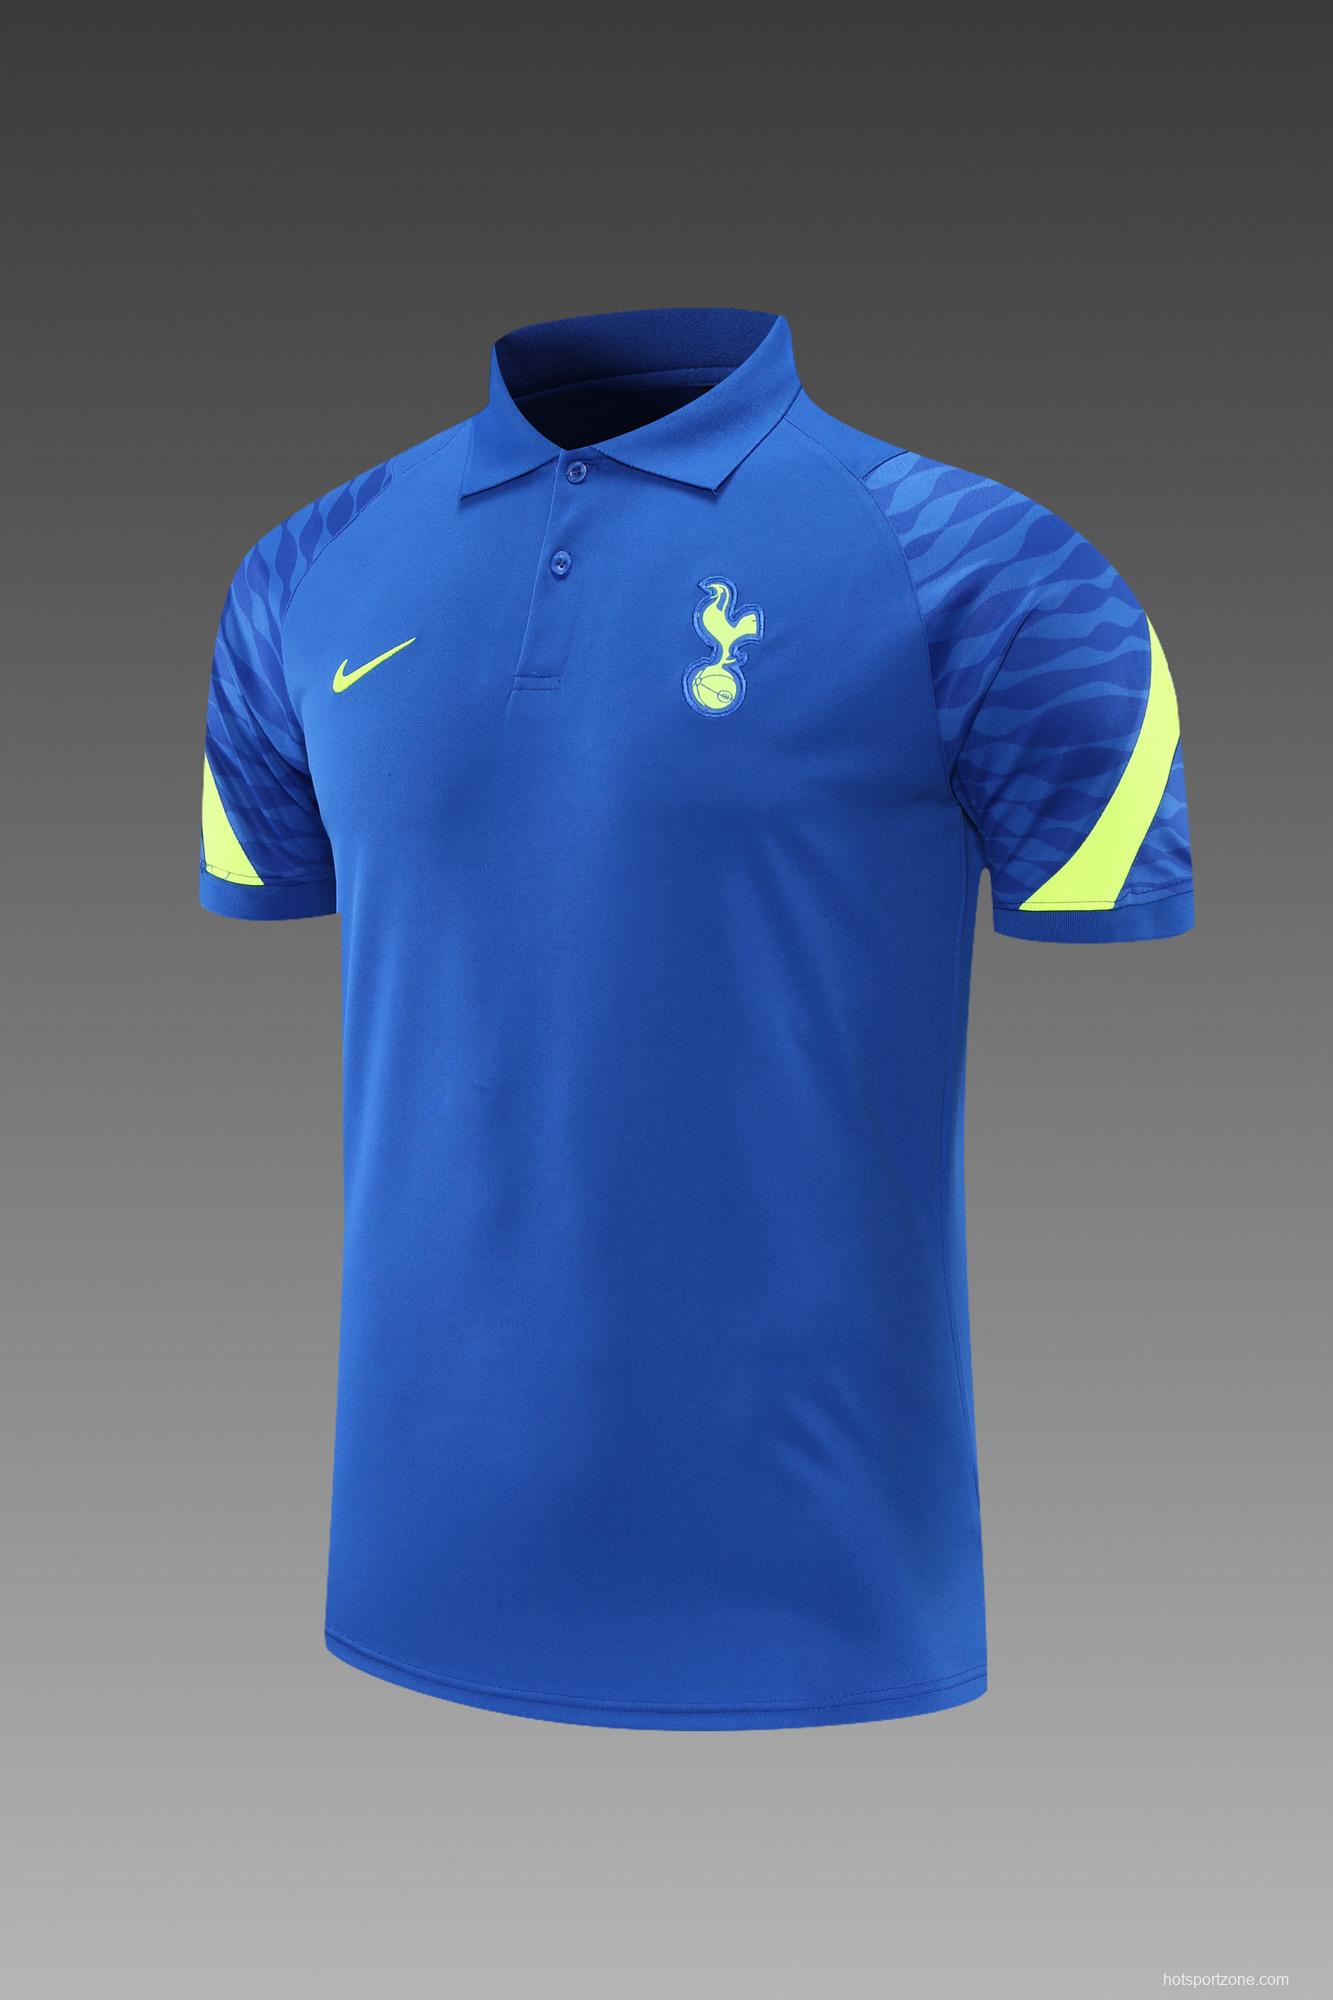 Tottenham Hotspur POLO kit Blue(not supported to be sold separately)